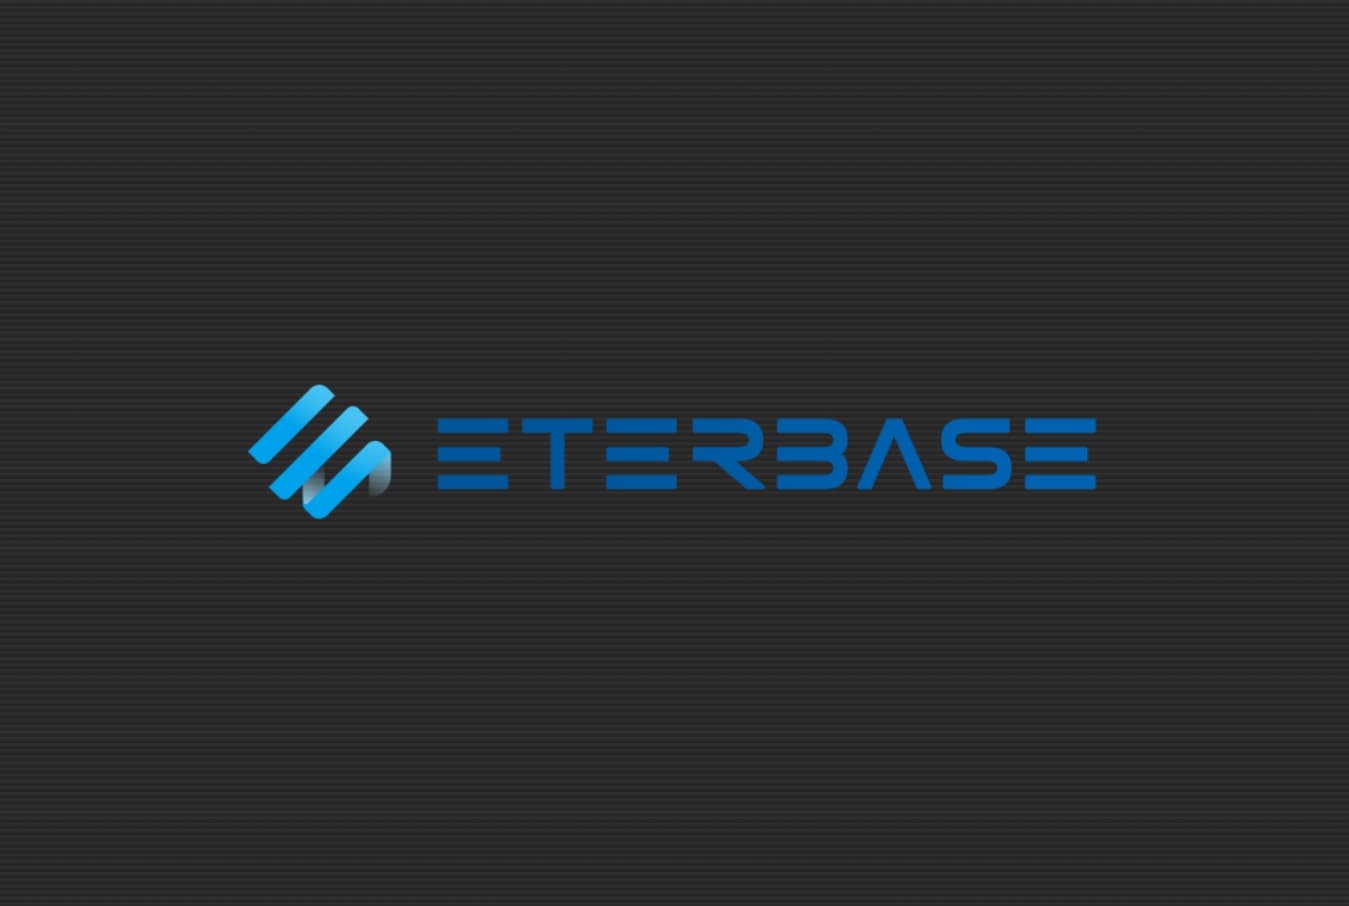 [hlink][/hlink] The Slovakian crypto exchange suffered a targeted hack attack on Monday night. Crypto exchanges are the favorite targets of cybercriminals because let's face it, it can make you multi-millionaire within seconds and which is why attacking them is such common practice among hackers. This time, Eterbase, a Bratislava, Slovakia based cryptocurrency exchange was attacked, and a whopping $5 million were stolen.  The notorious cybercriminals emptied several of its Hot Wallets and stole different types of cryptocurrencies.  Hot wallets are those storages connected to the internet, whereas Cold Wallets aren’t accessible via the internet. Eterbase confirmed the news on its Telegram and Twitter channels on Tuesday, stating that six hot wallets of the exchange containing ether (ETH), ERC-20 tokens, bitcoin (BTC), XRP, Algorand (ALGO), and Tezos (XTZ) were compromised. In its official announcement, the exchange has also confirmed assets worth approximately $ 5.4 million were stolen. [wp_ad_camp_1] [wp_ad_camp_2]  According to reports, the majority of the stolen crypto, roughly $3.9m, were stored in ERC-20 tokens and Ethereum. The second most affected cryptocurrency is XTZ since the value of stolen currency amounts to $417,000.  The funds were transferred to different exchanges. Reportedly, the ETH funds went into the US’s Stablecoin, Tether, Compound, which is a non-custodial lending protocol, Uniswap, a decentralized exchange, and the centralized exchange Binance. Eterbase has suspended its trading operations until 10 Sep and has informed all ‘centralized exchanges’ that may receive the stolen funds. The exchange’s statement posted on Telegram read: “We have reported the matter to law enforcement and we are cooperating closely in the investigation. We want to assure our clients that we are taking all necessary steps to ensure that the amount of their deposit does not suffer any damage as a result of a hacker attack.” [hlink][/hlink]  The exchange’s social media channels controller Nenad Ristic stated that personal information wasn’t stolen, and the company has enough funds available to oblige its customers. Did you enjoy reading this article? Do like our page on Facebook and follow us on Twitter.